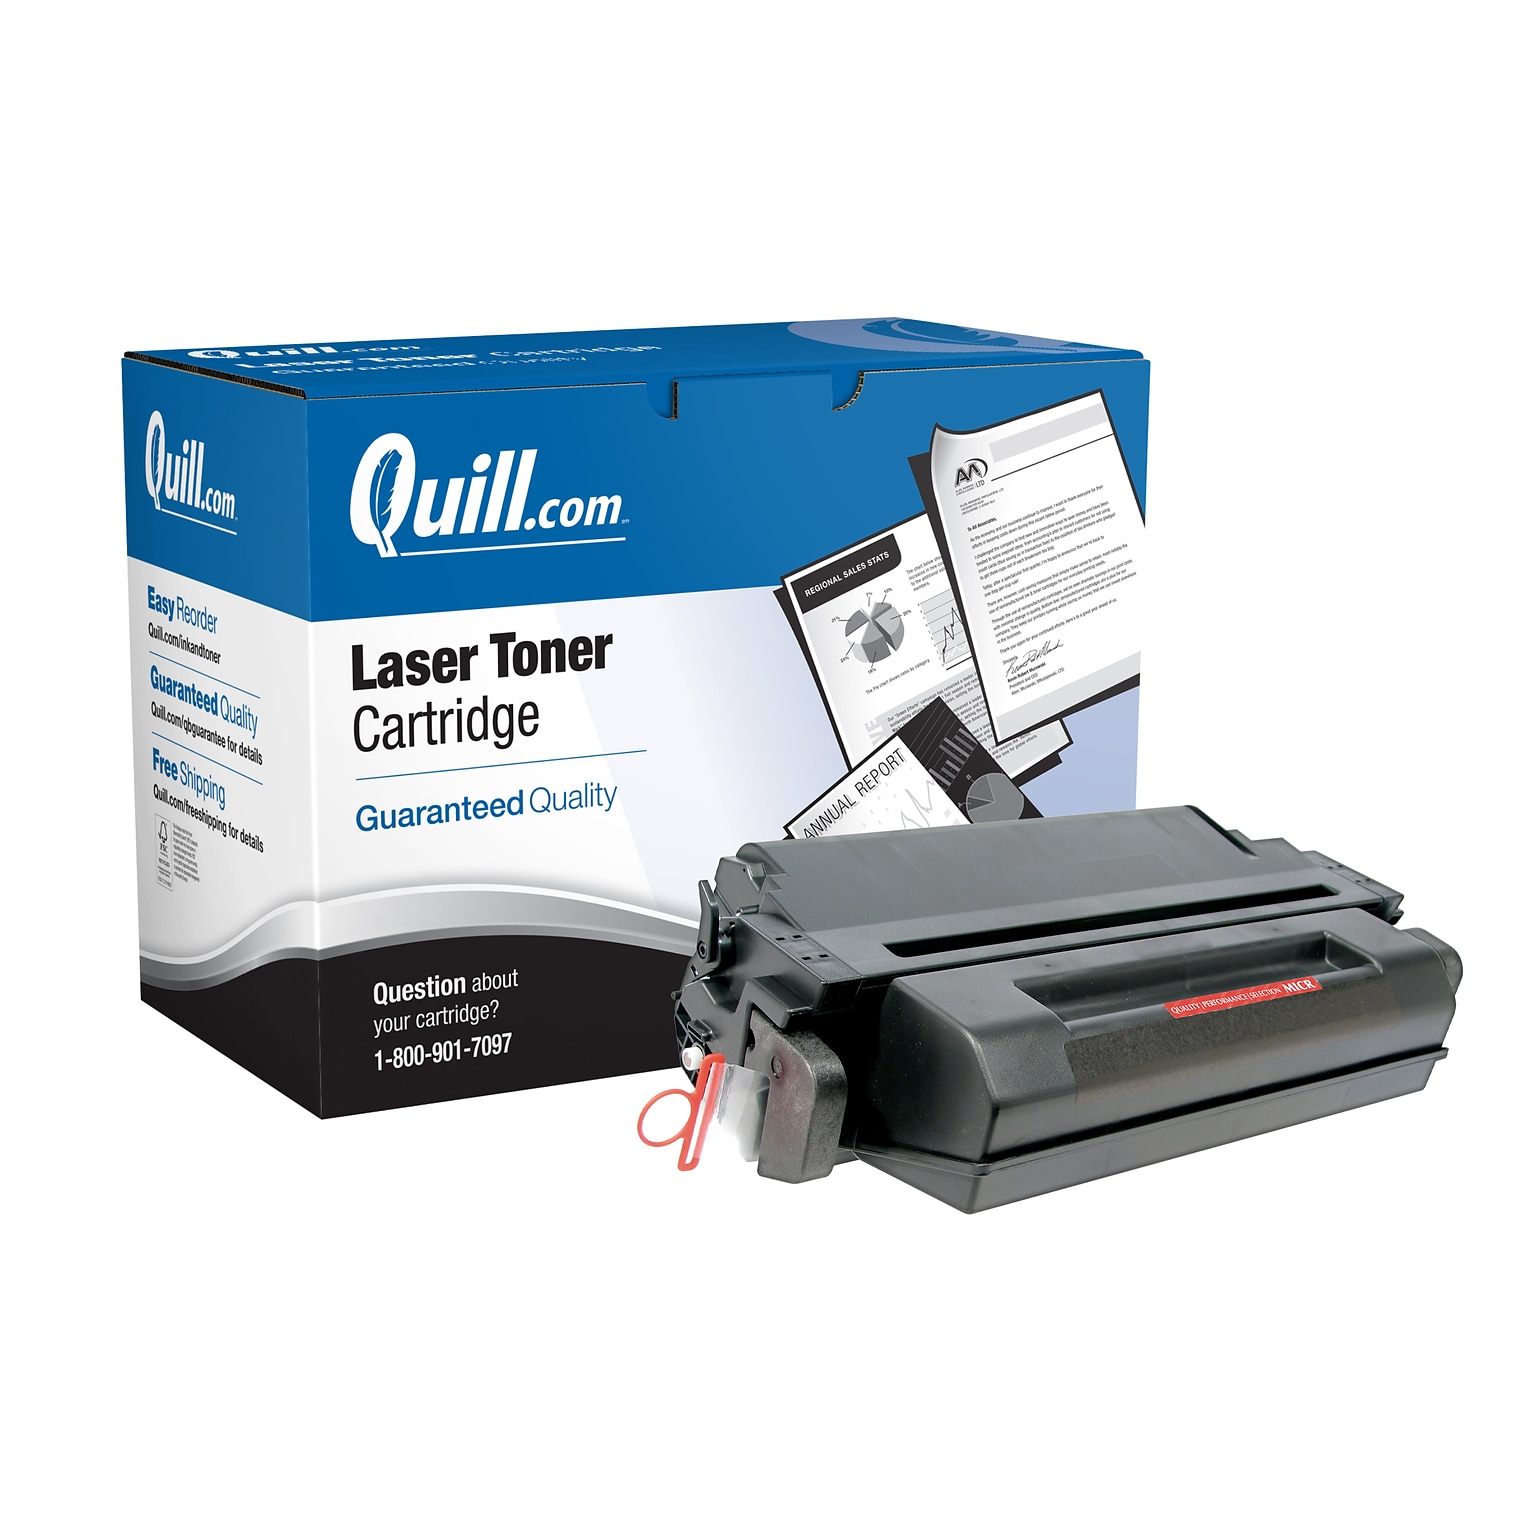 Quill Brand® Remanufactured Black Standard Yield MICR Toner Cartridge Replacement for HP 09A (C3909A) (Lifetime Warranty)